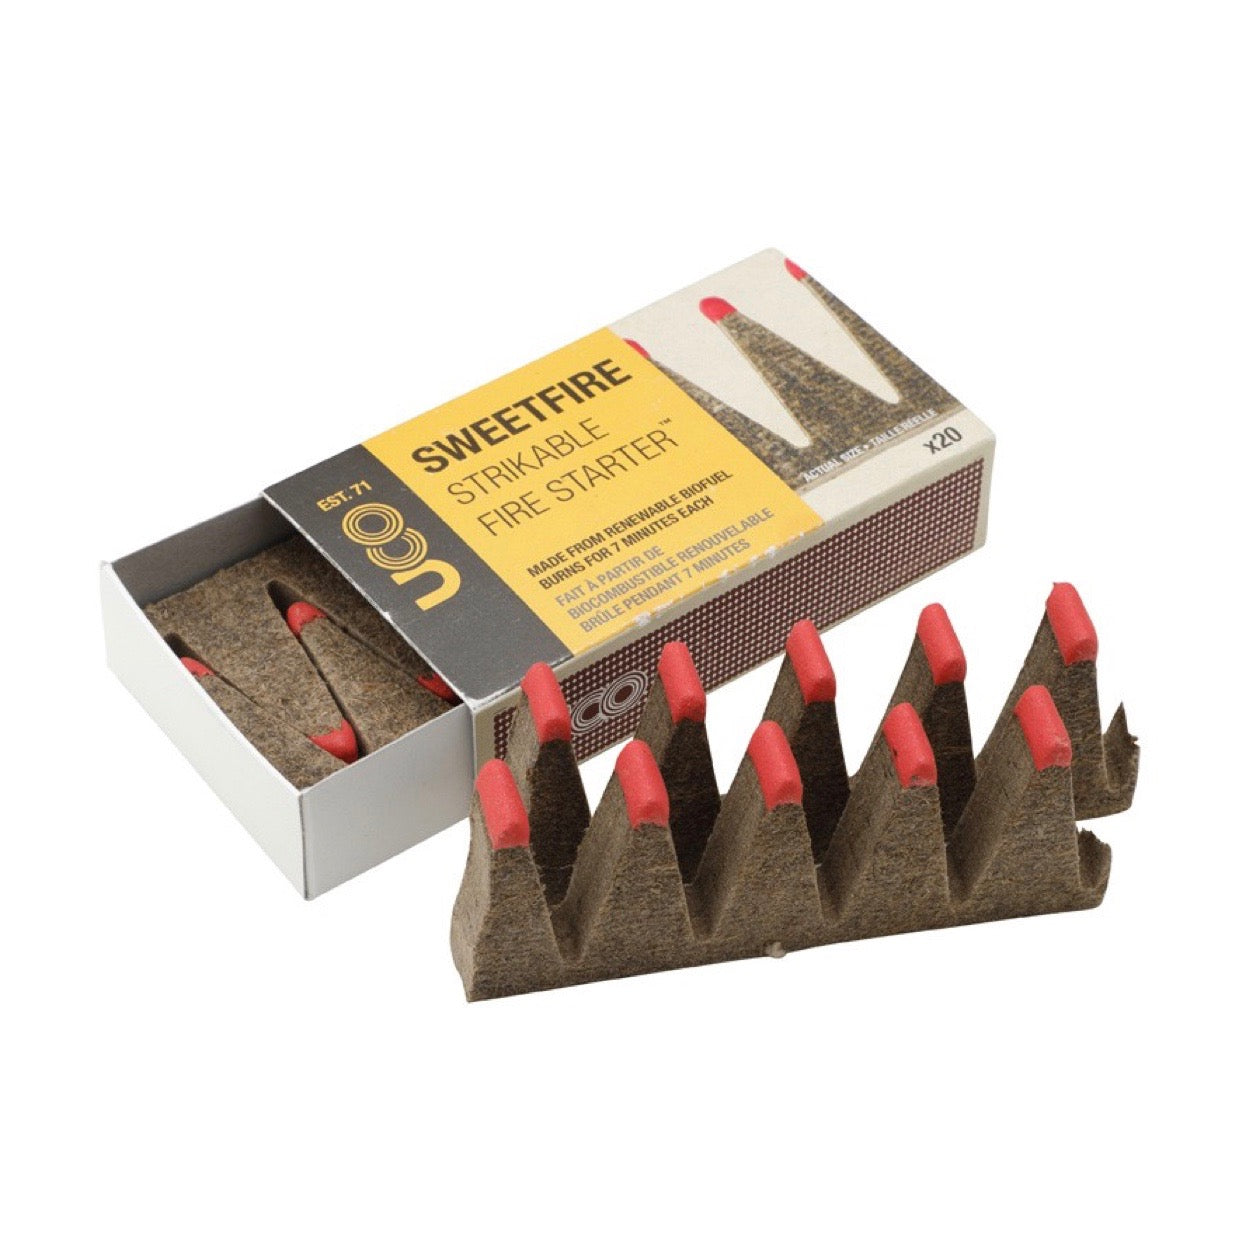 UCO Sweetfire Strikable Fire Starter